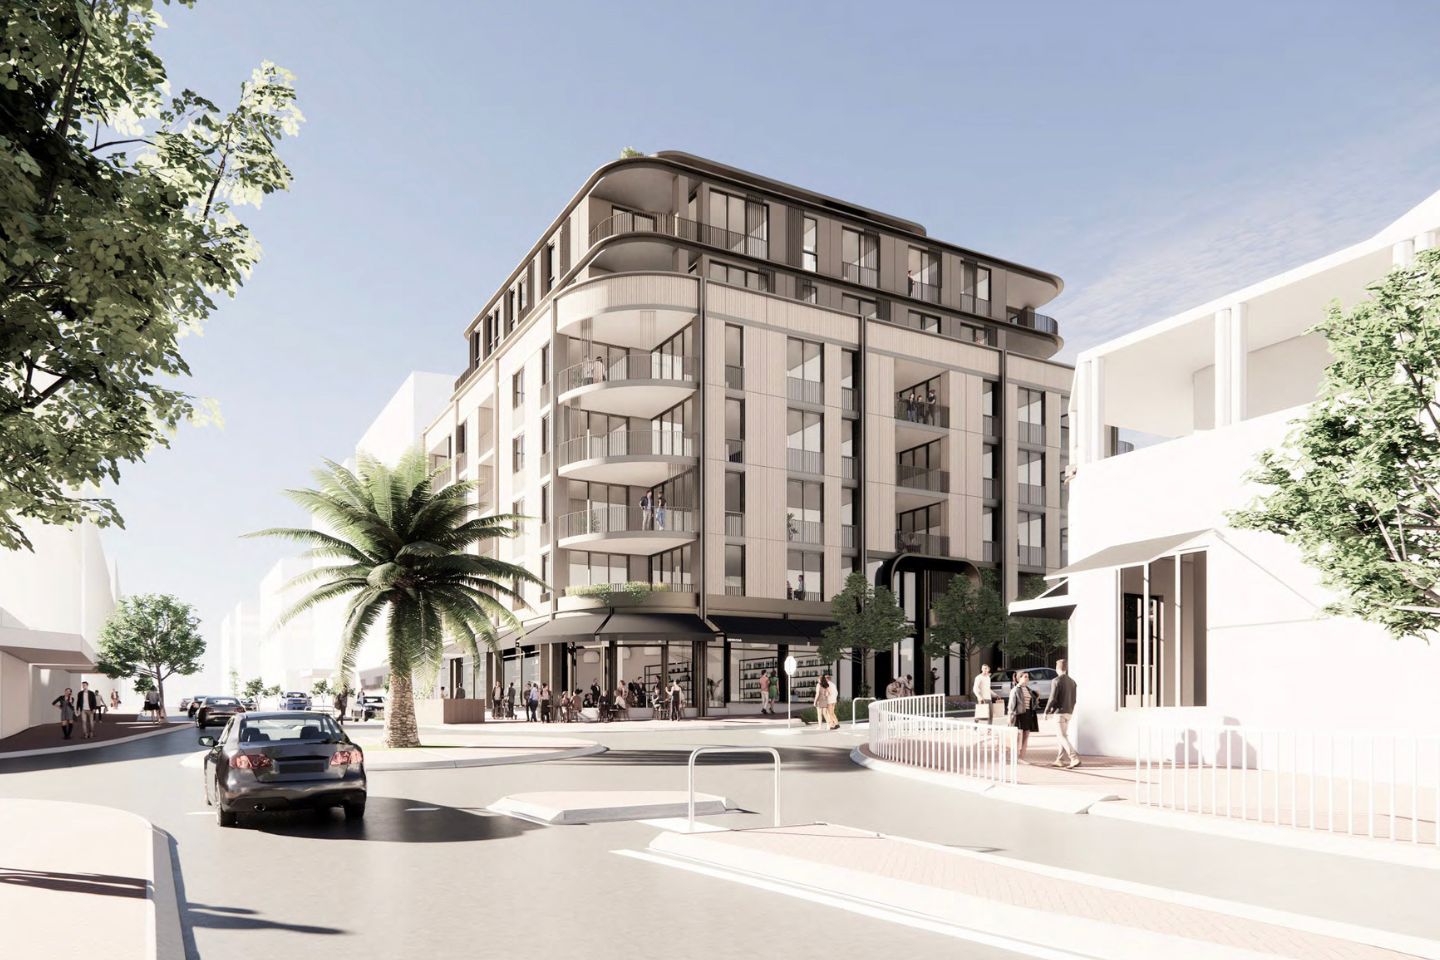 Panel approves Oxford Street apartments